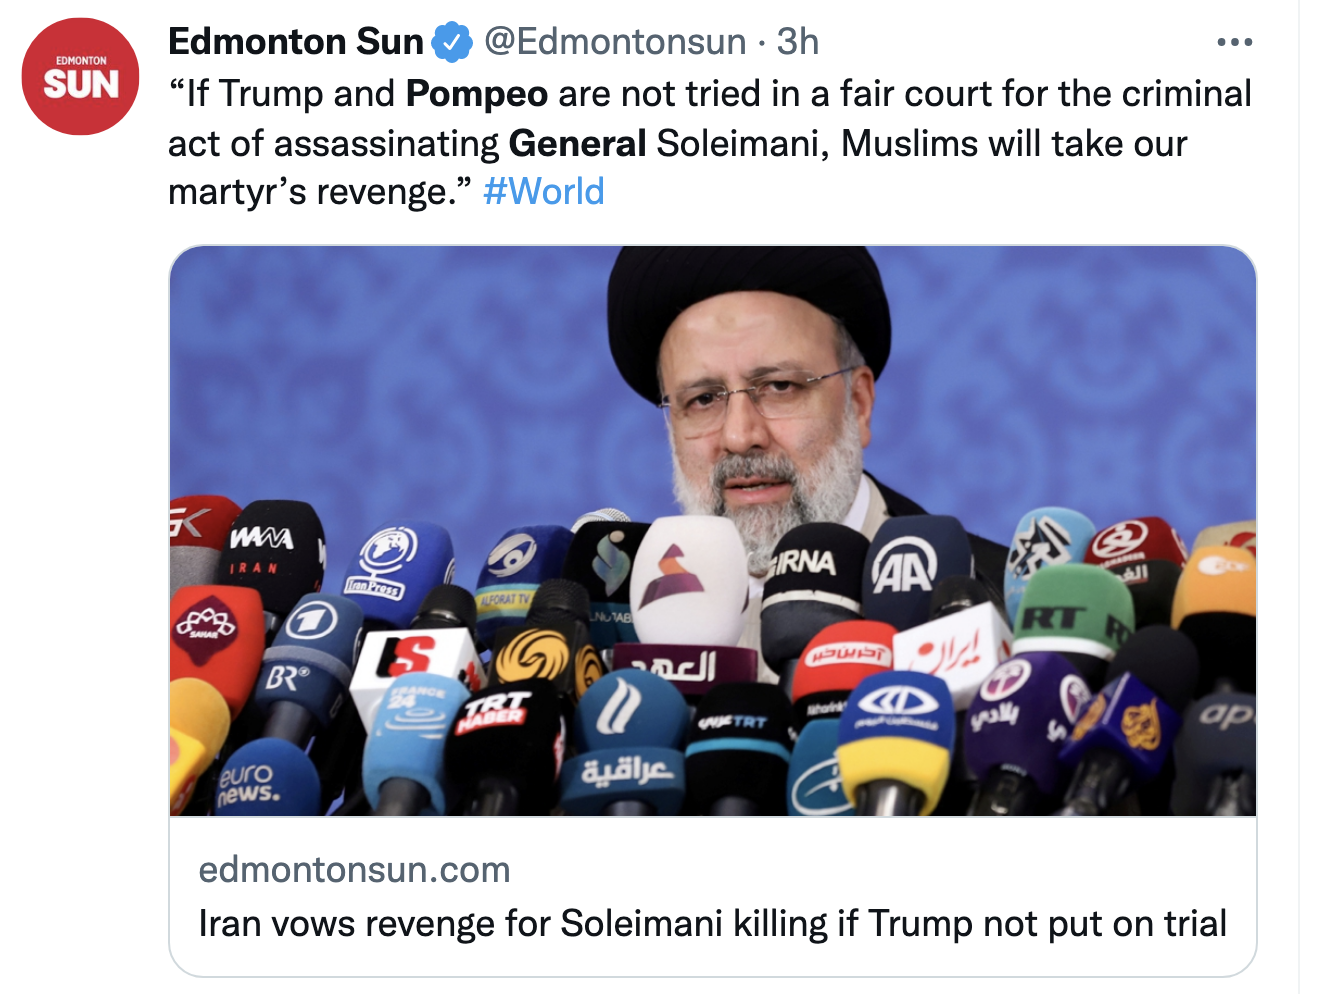 Screen-Shot-2022-01-03-at-3.51.14-PM Court Trial For Donald Trump & Mike Pompeo Over Killing Of Soleimani Demanded Crime Donald Trump Featured Politics Top Stories 